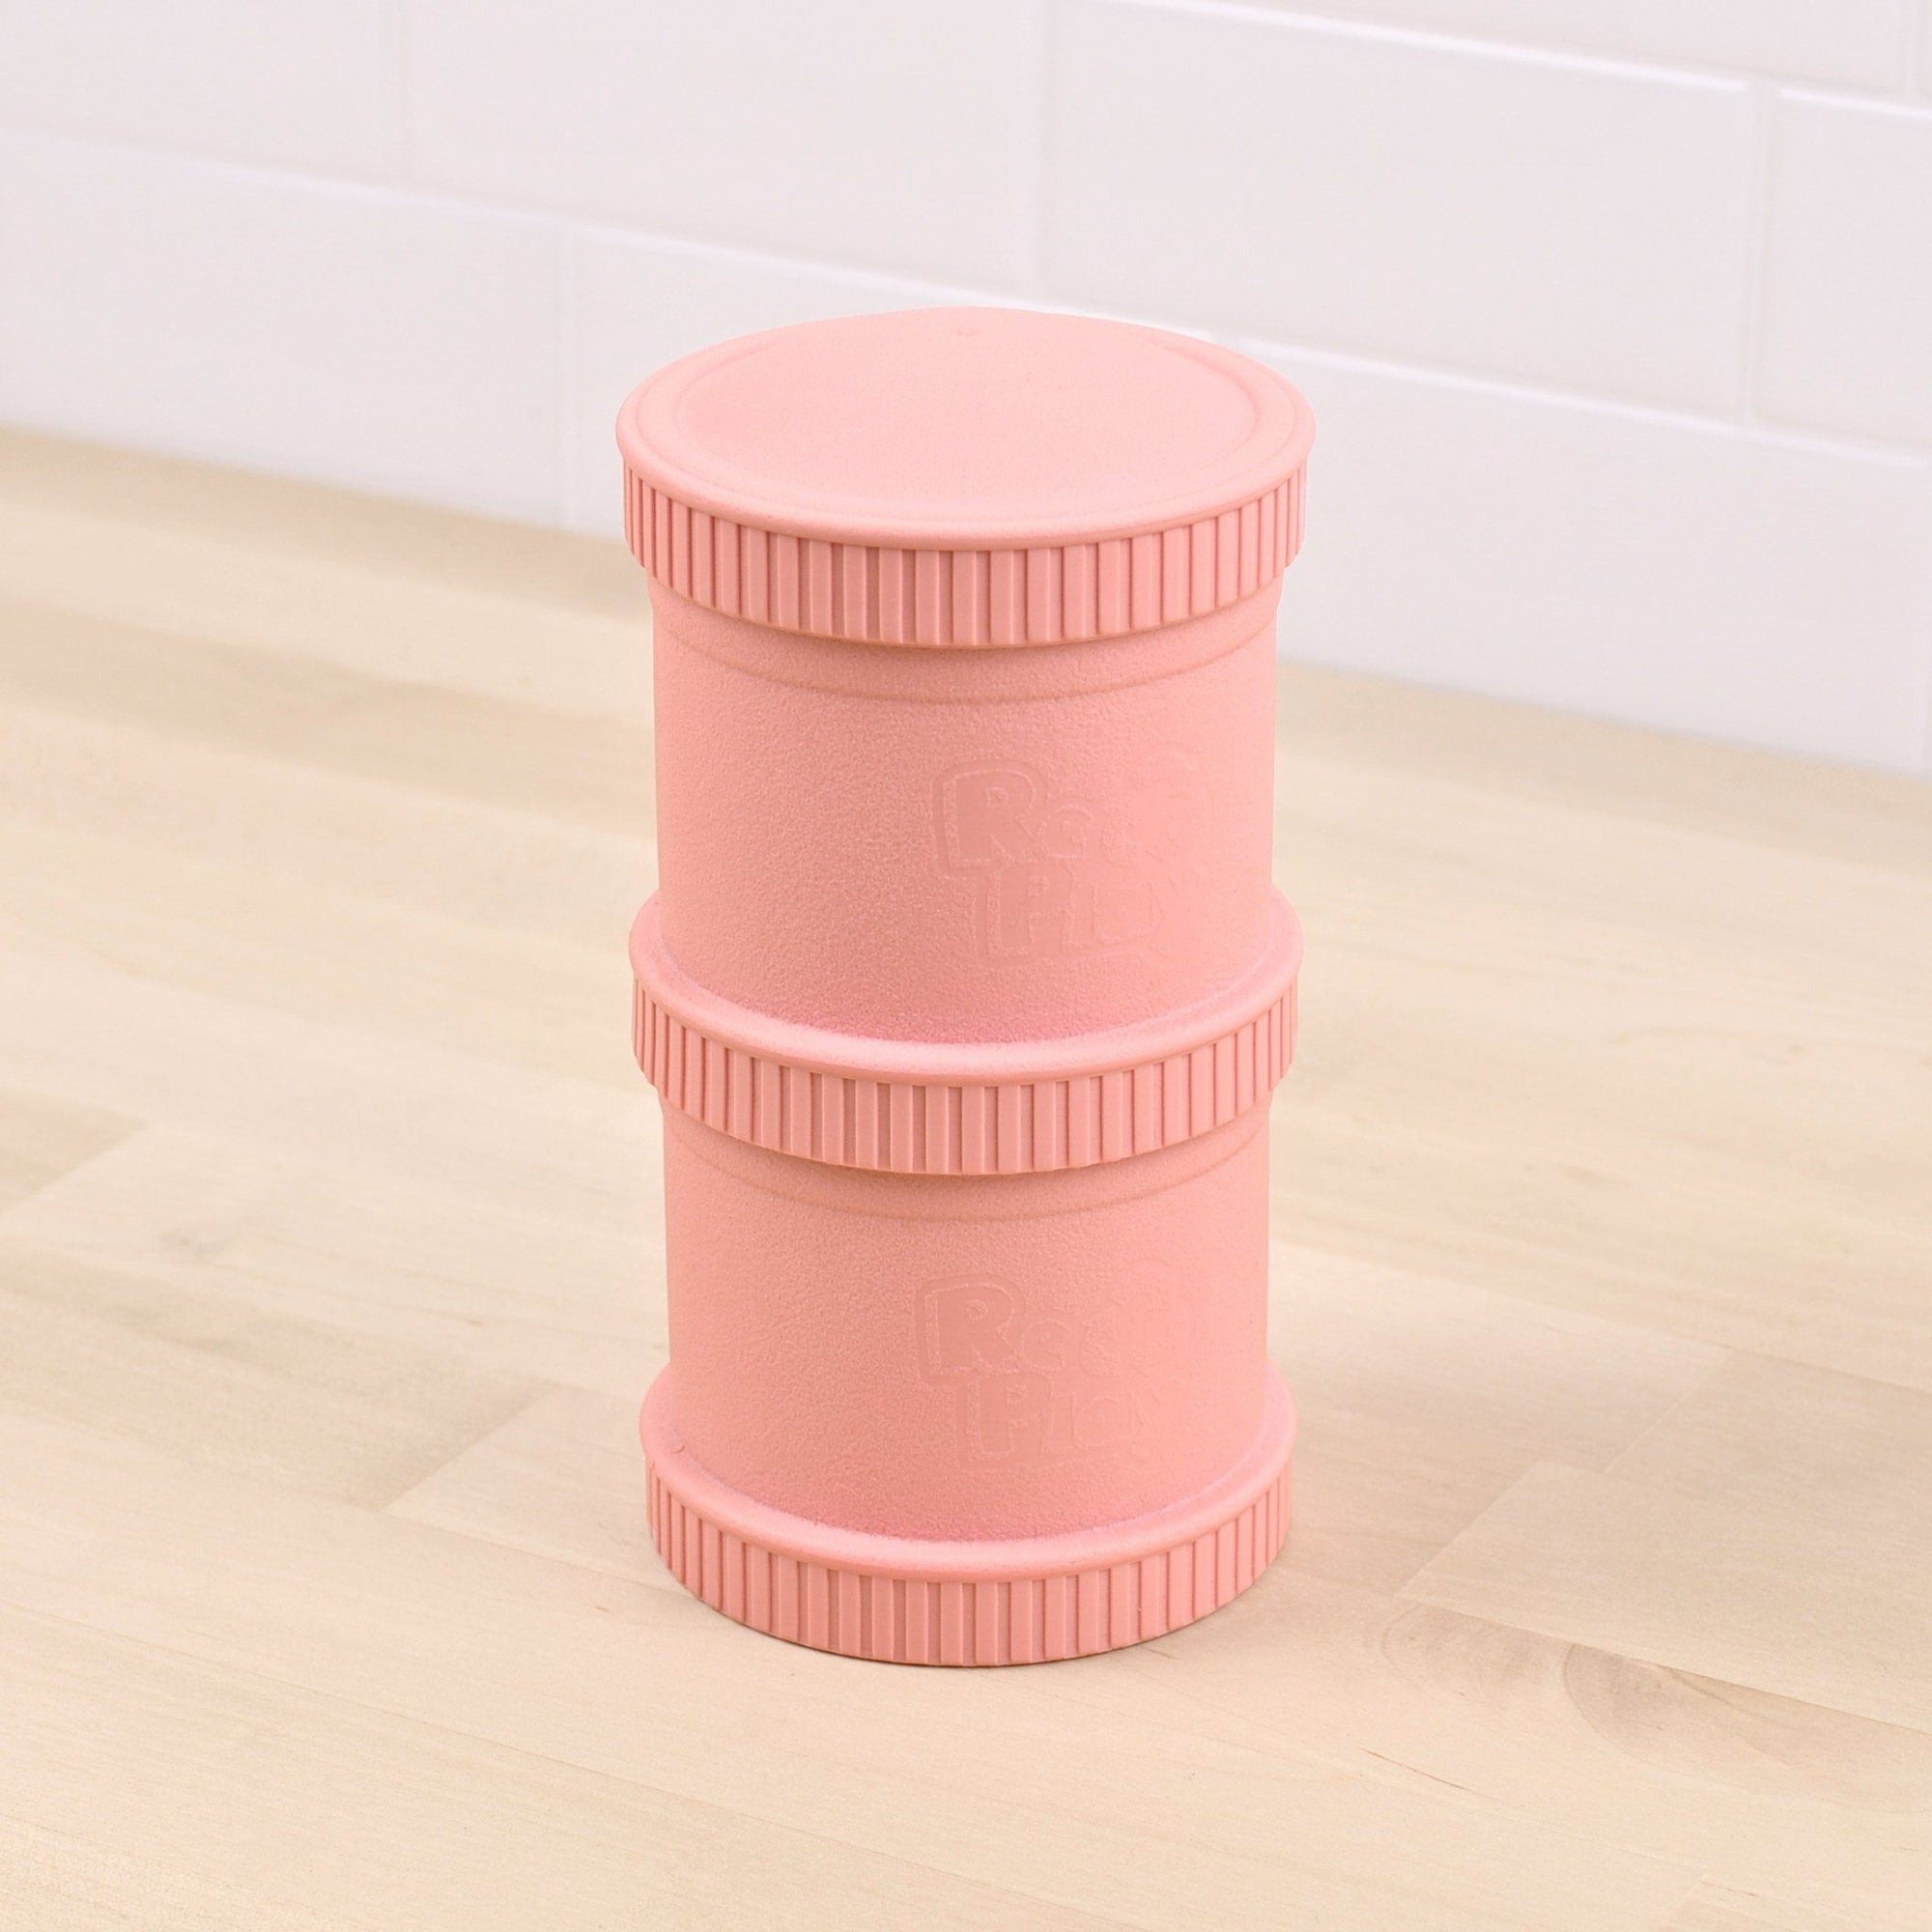 Snack Stack (Baby Pink)